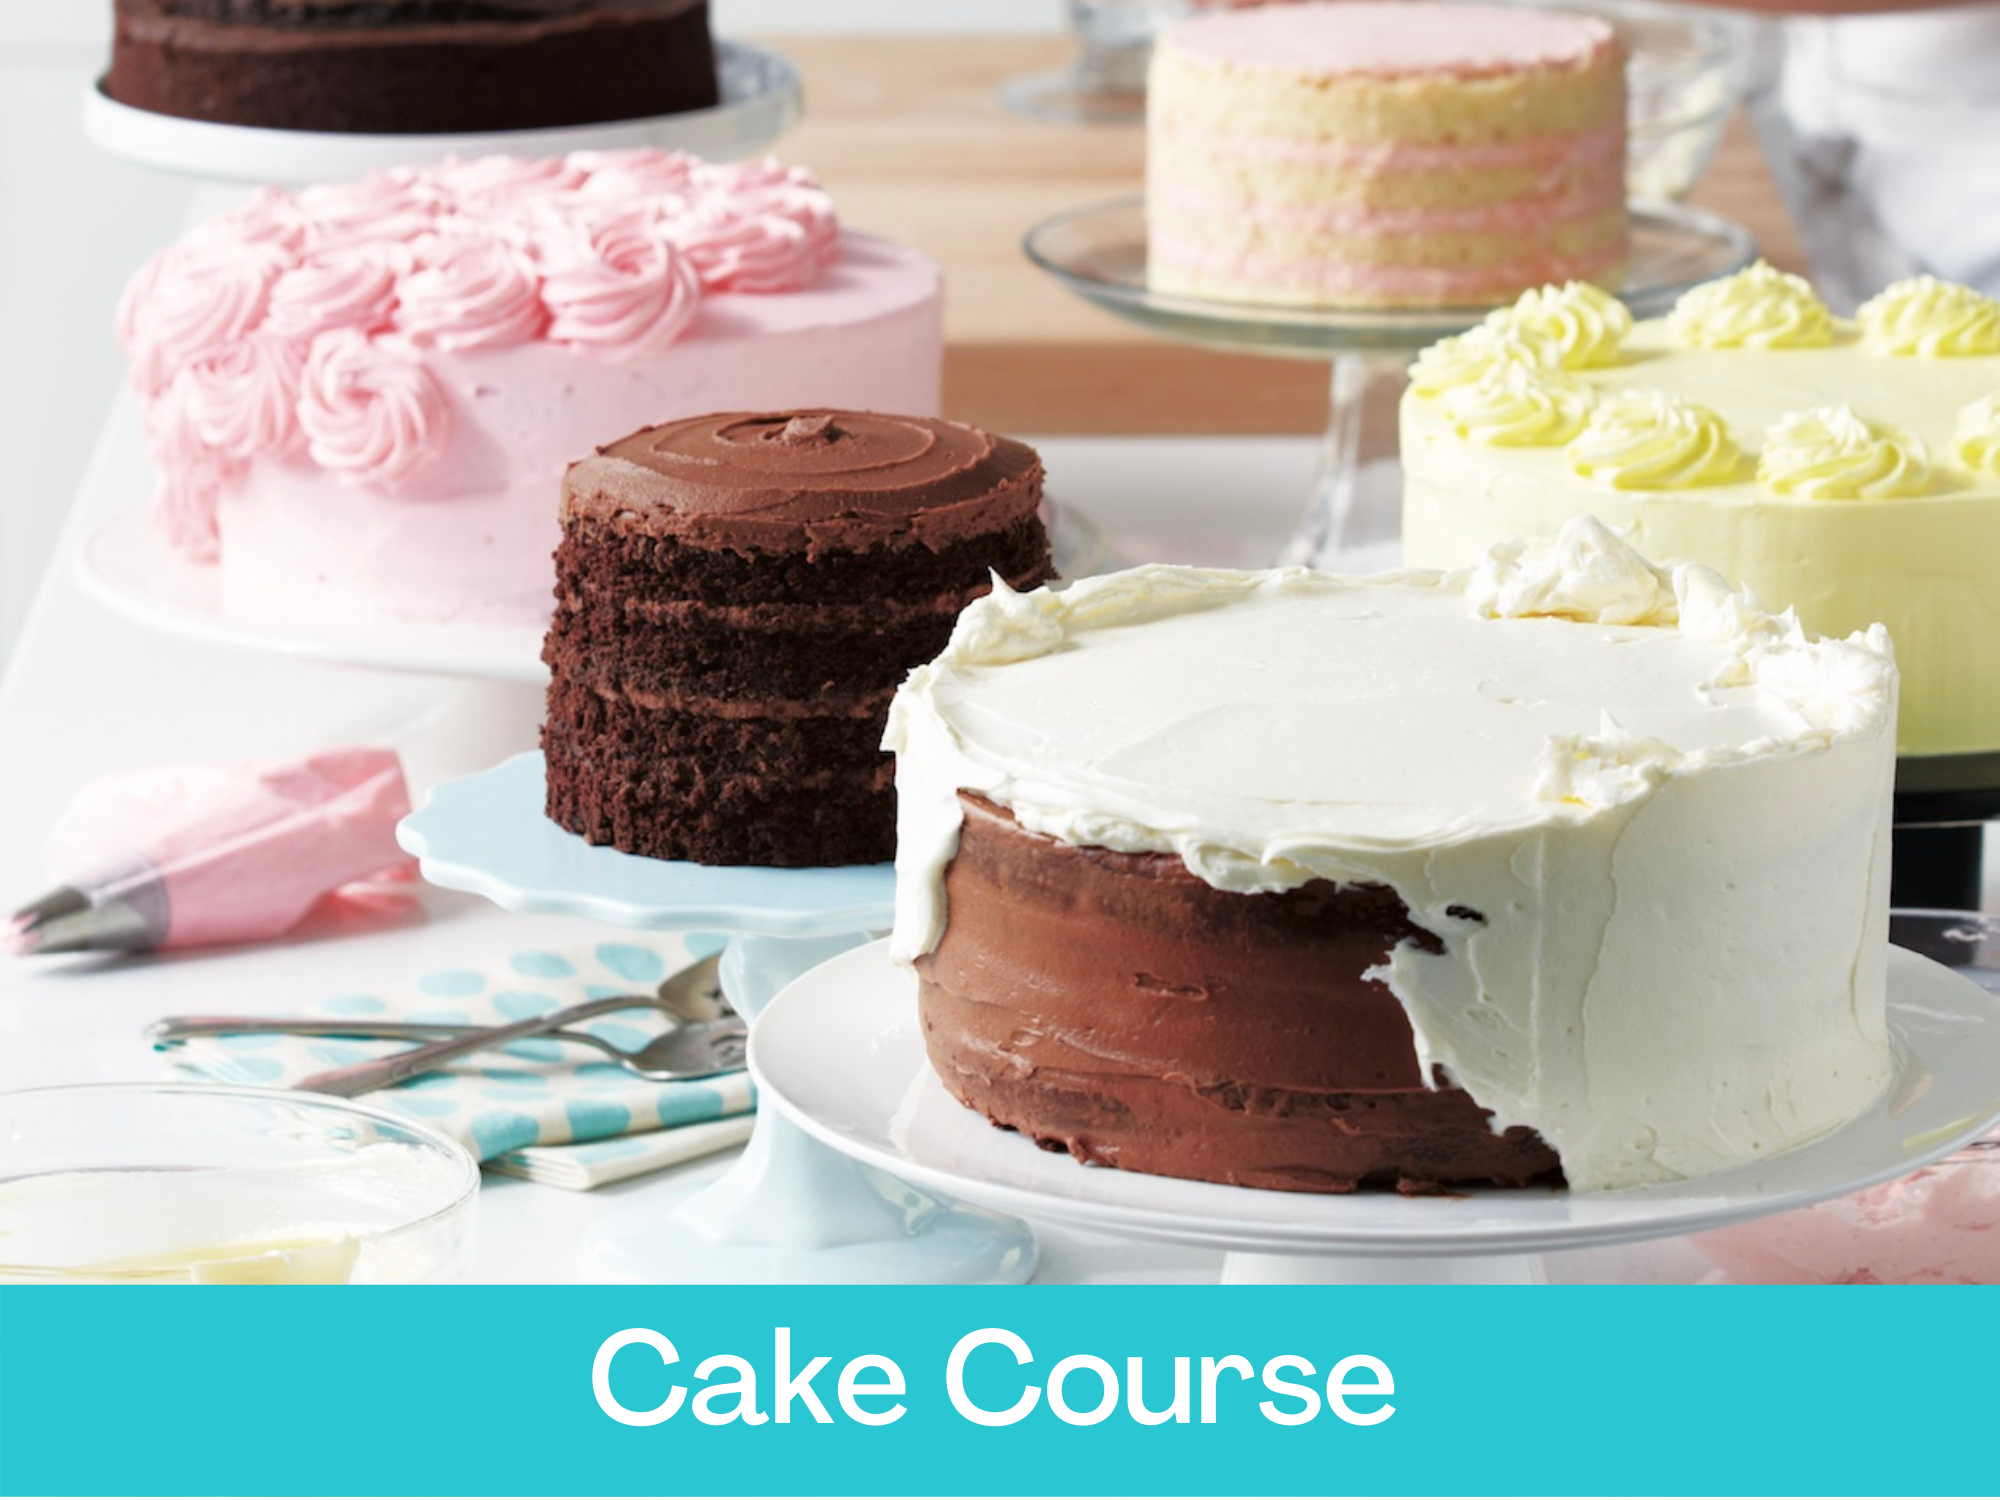 Online Cake Courses – The Gourmet Cake Company